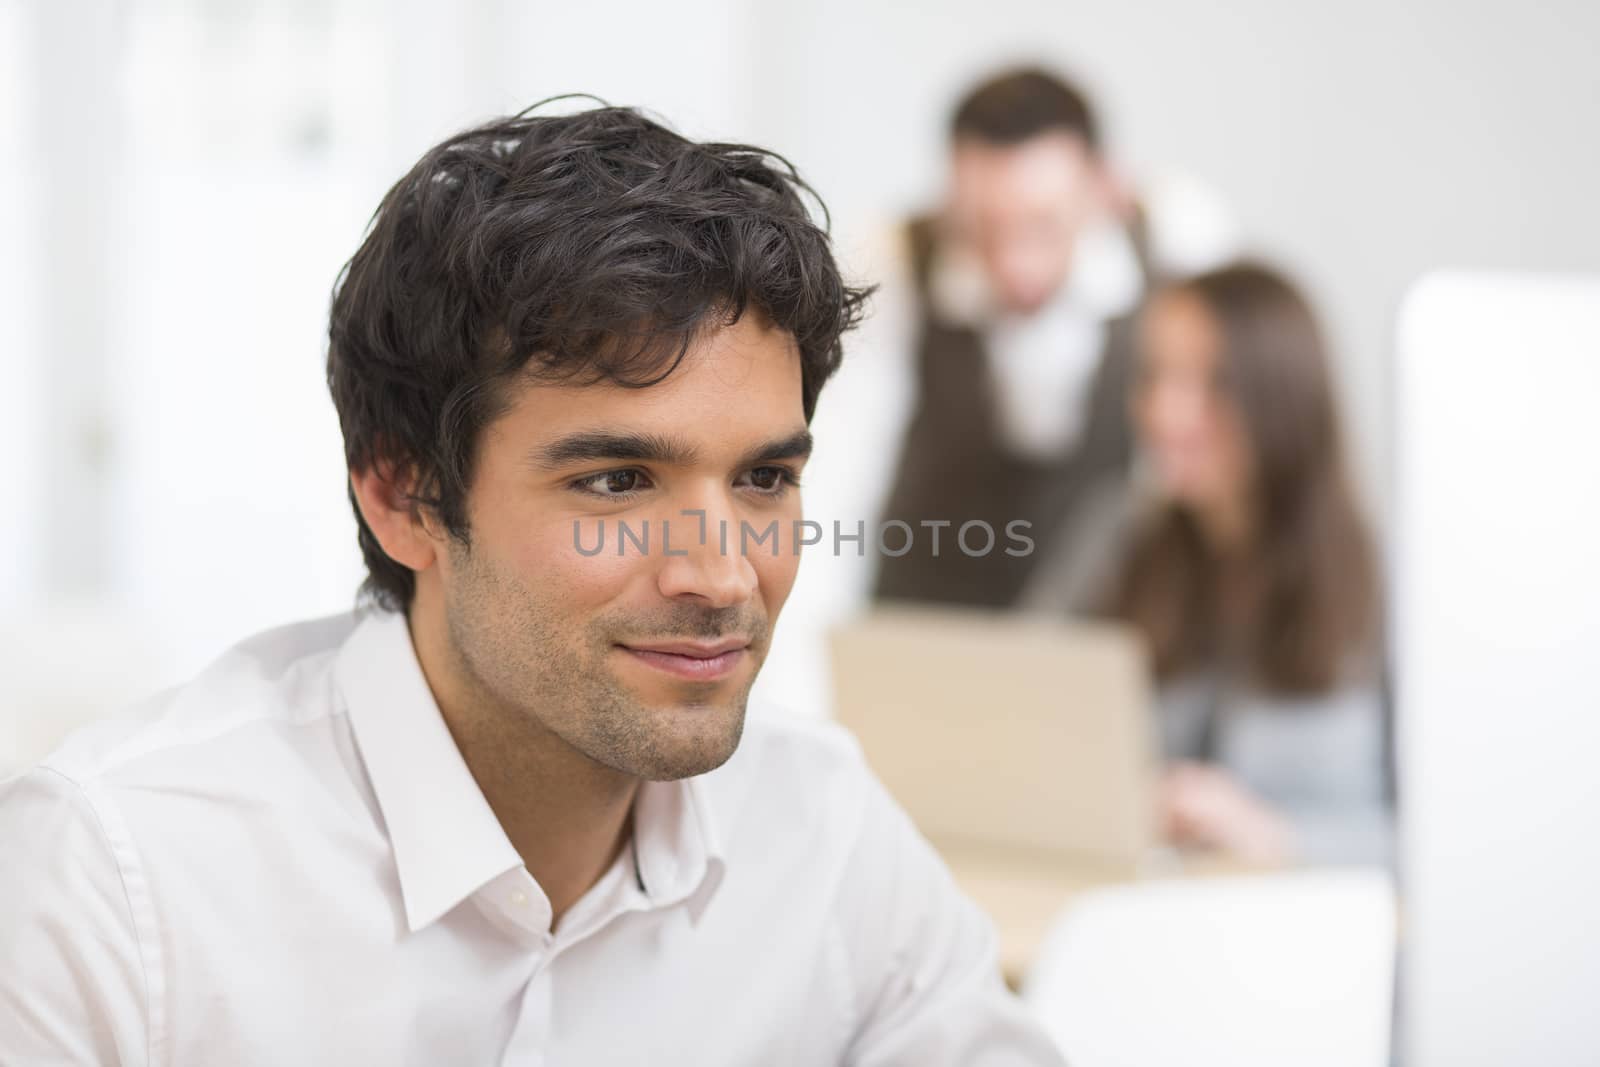 Portrait of businessman working on computer in office by LDProd